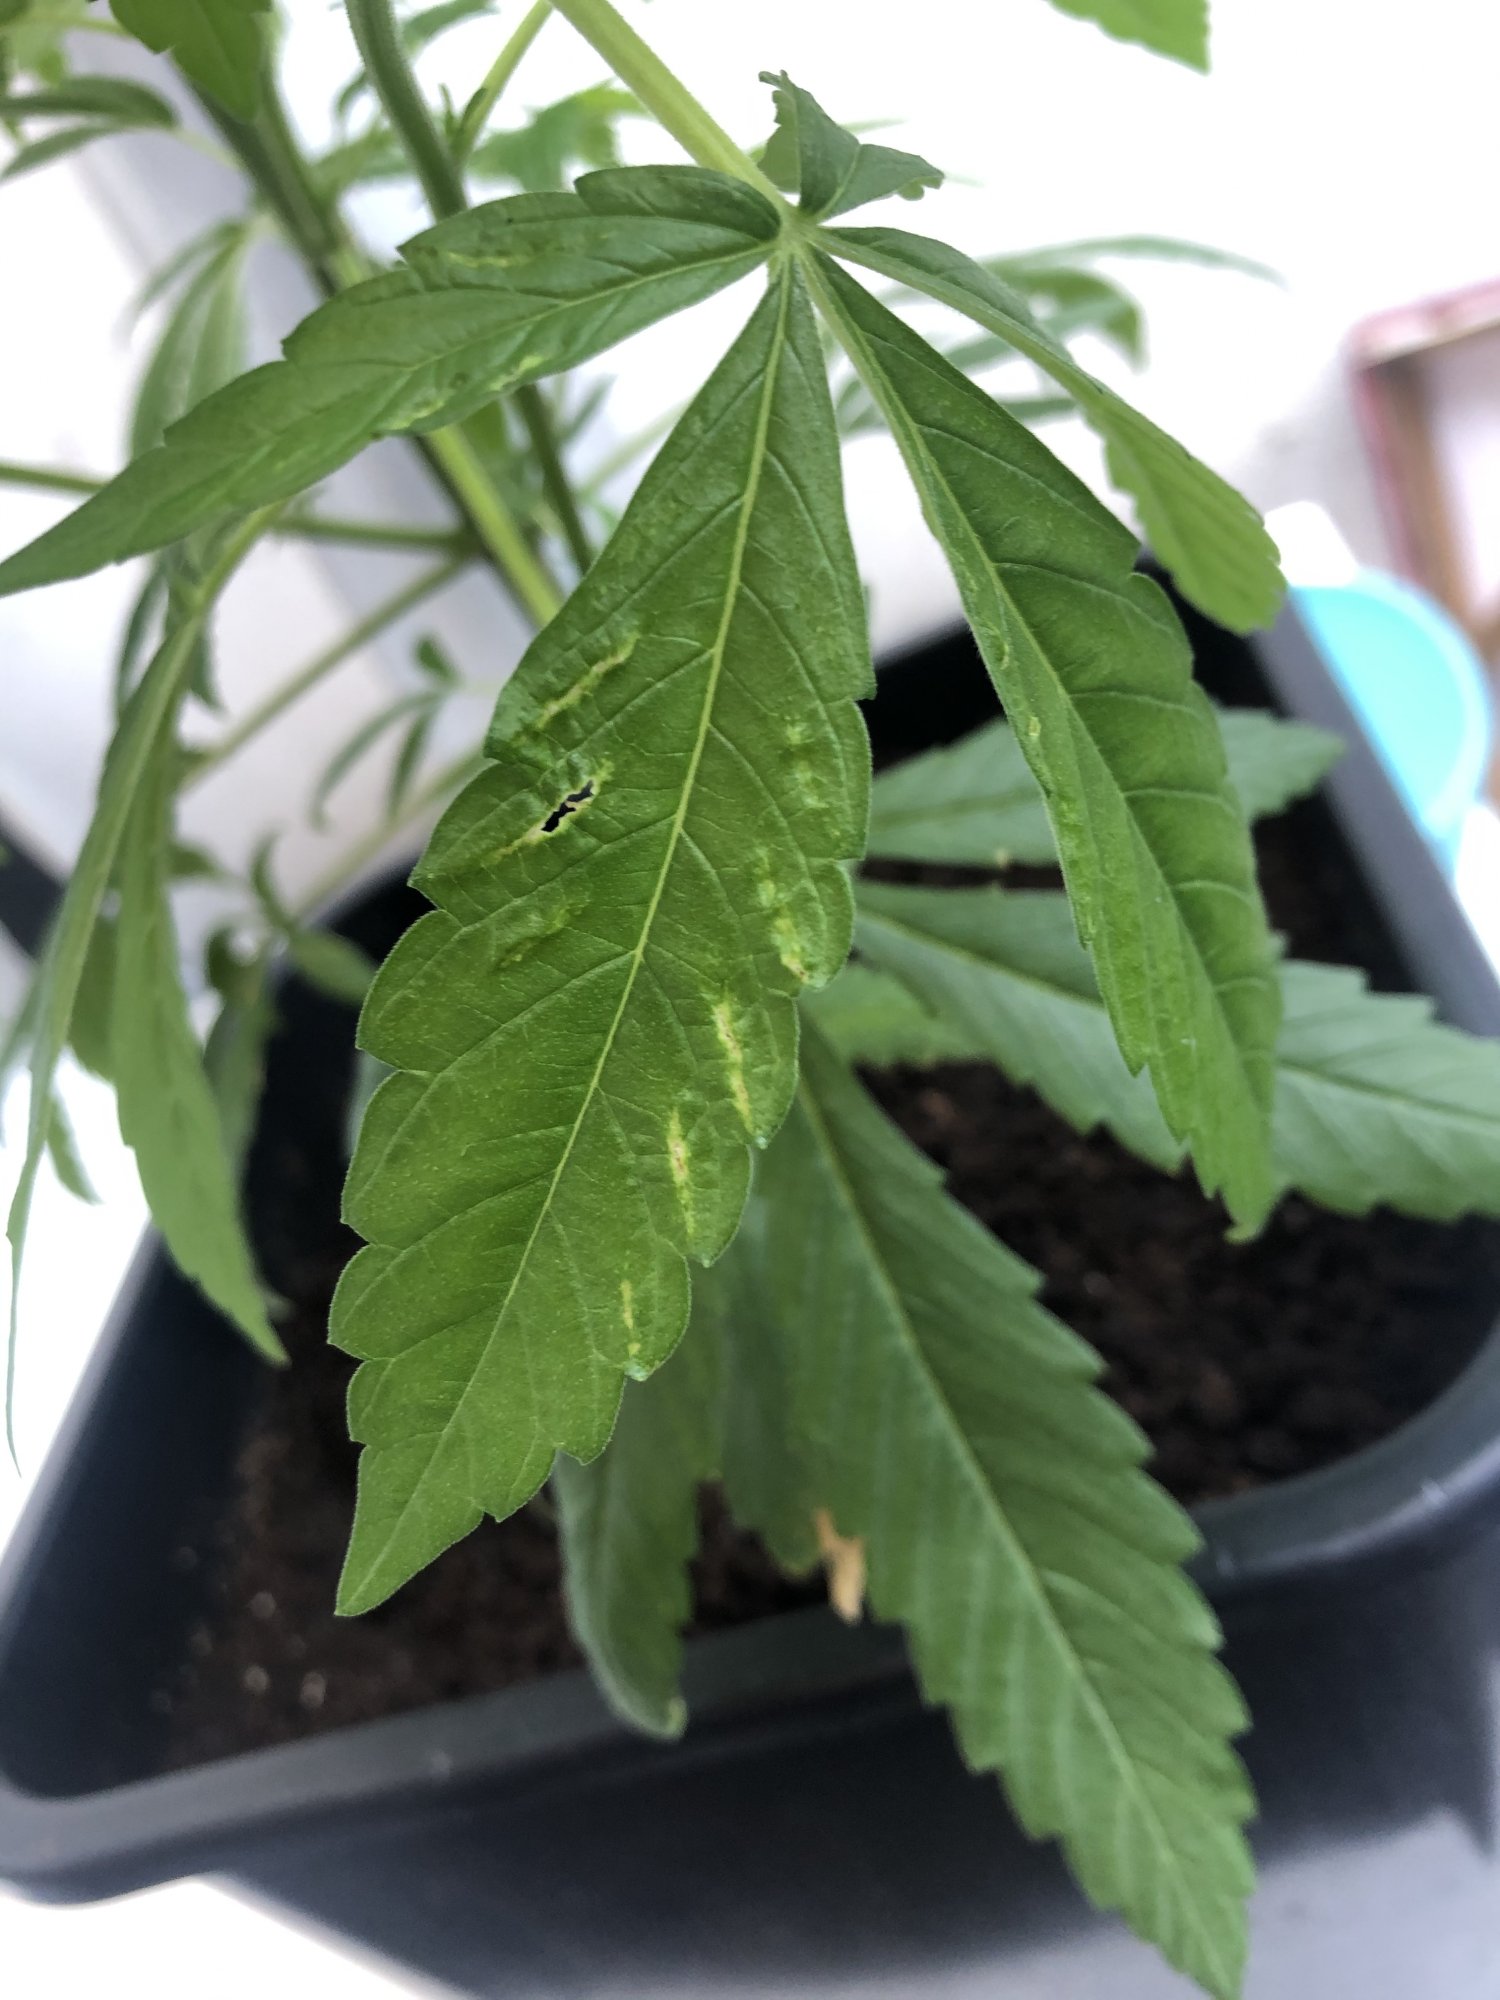 Holes appearing in leafs help and info please 3